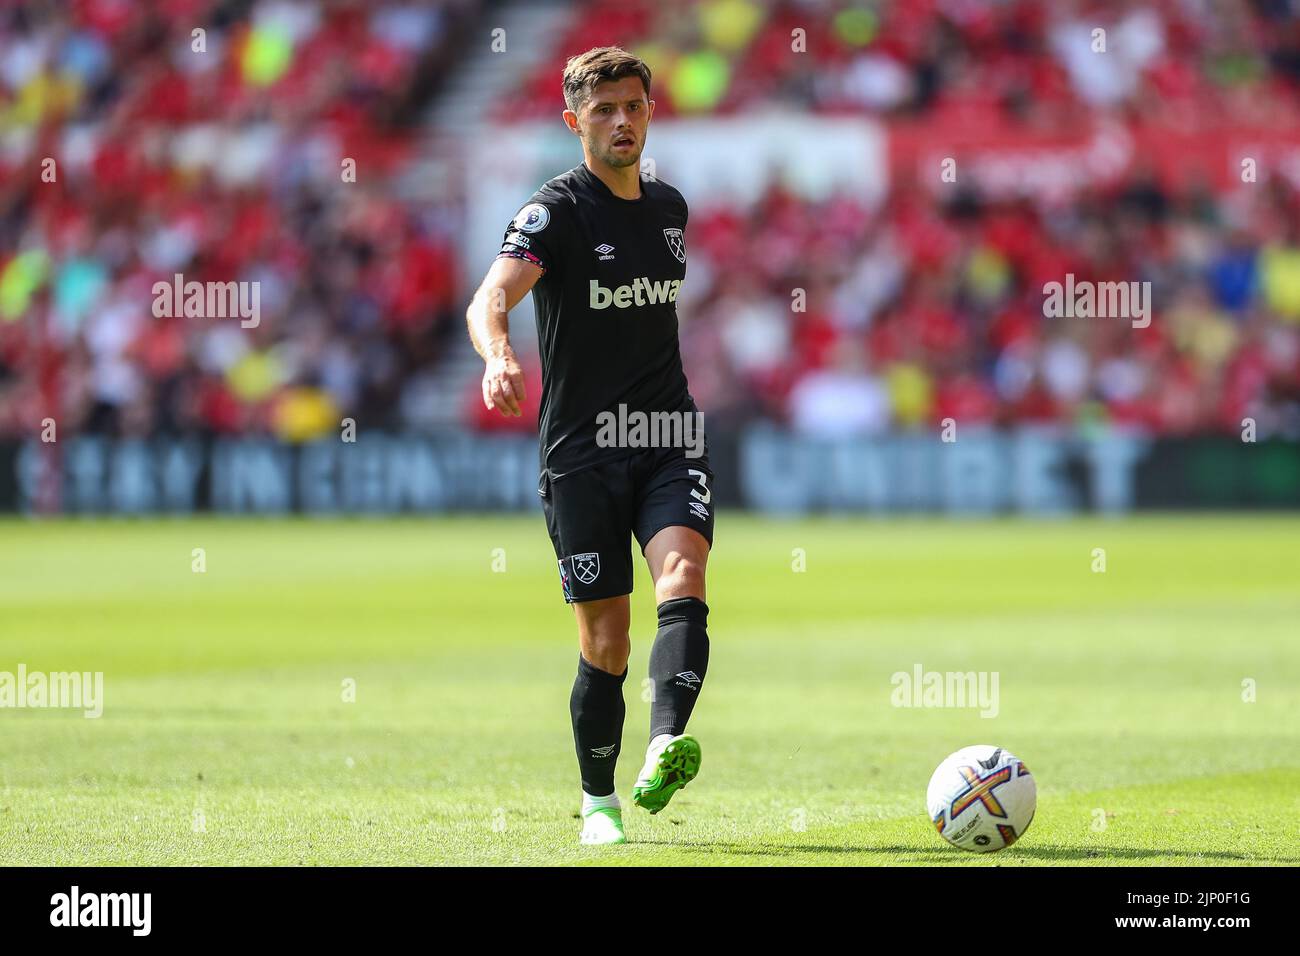 Aaron Cresswell #3 of West Ham United passes the ball Stock Photo